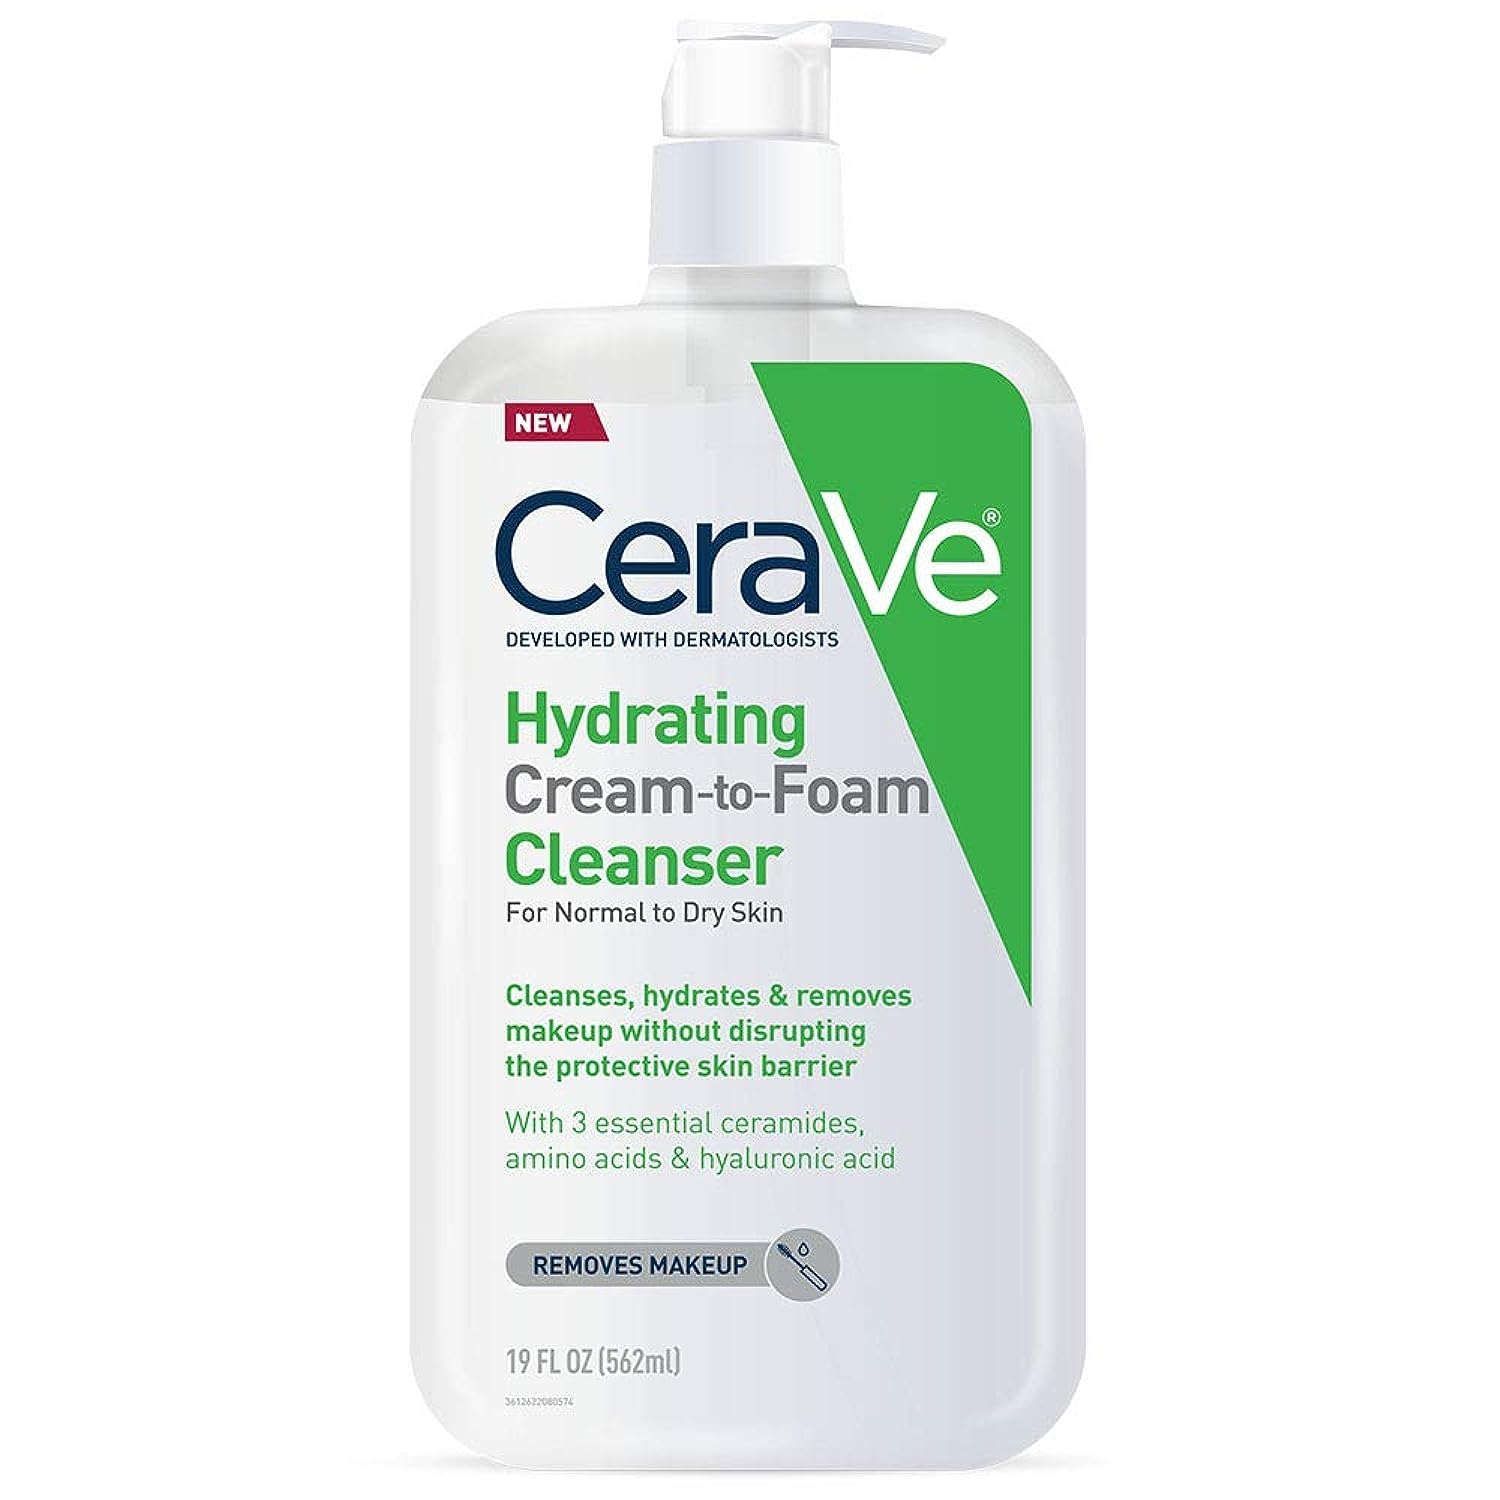 Cerave hydrating cream to foam cleanser, best pregnancy safe face wash